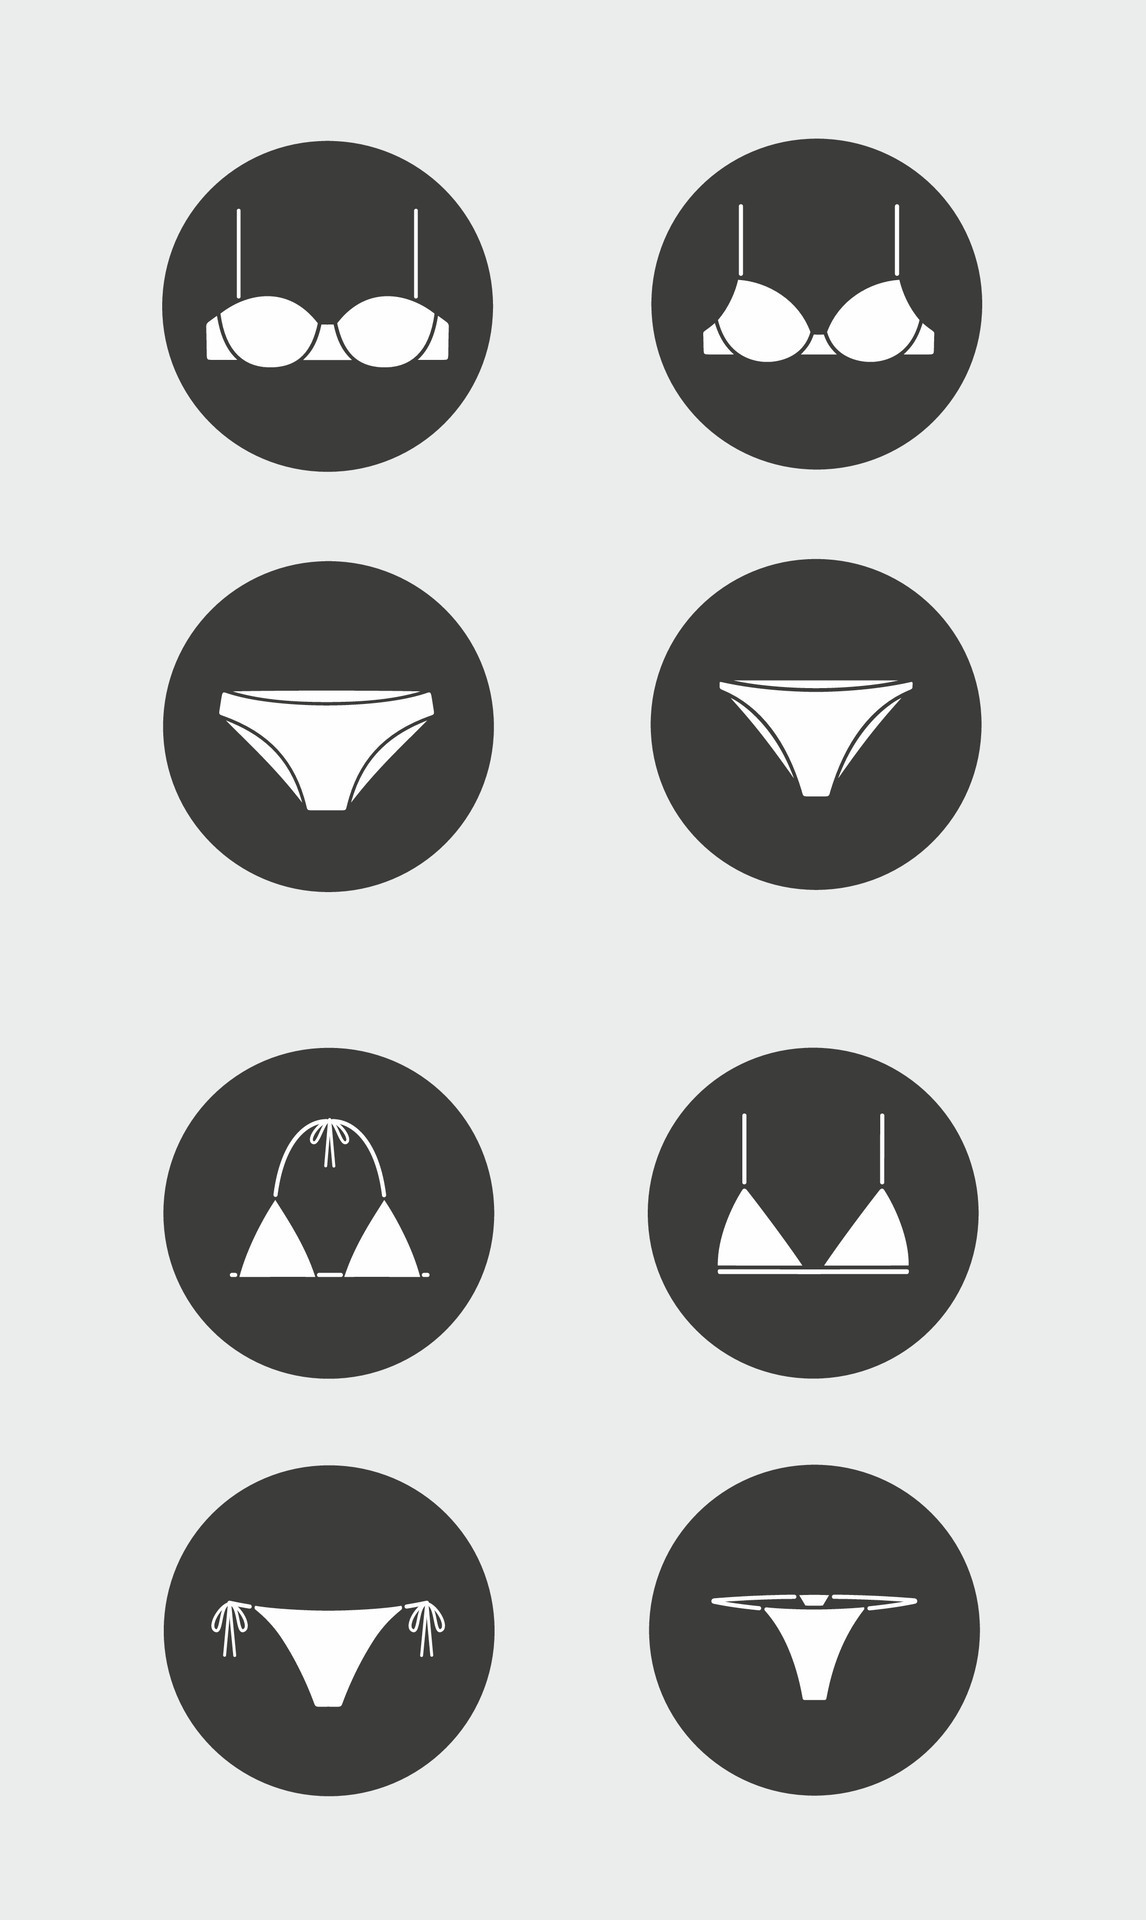 Women's lingerie. Bra and panties icon in the circle. Vector